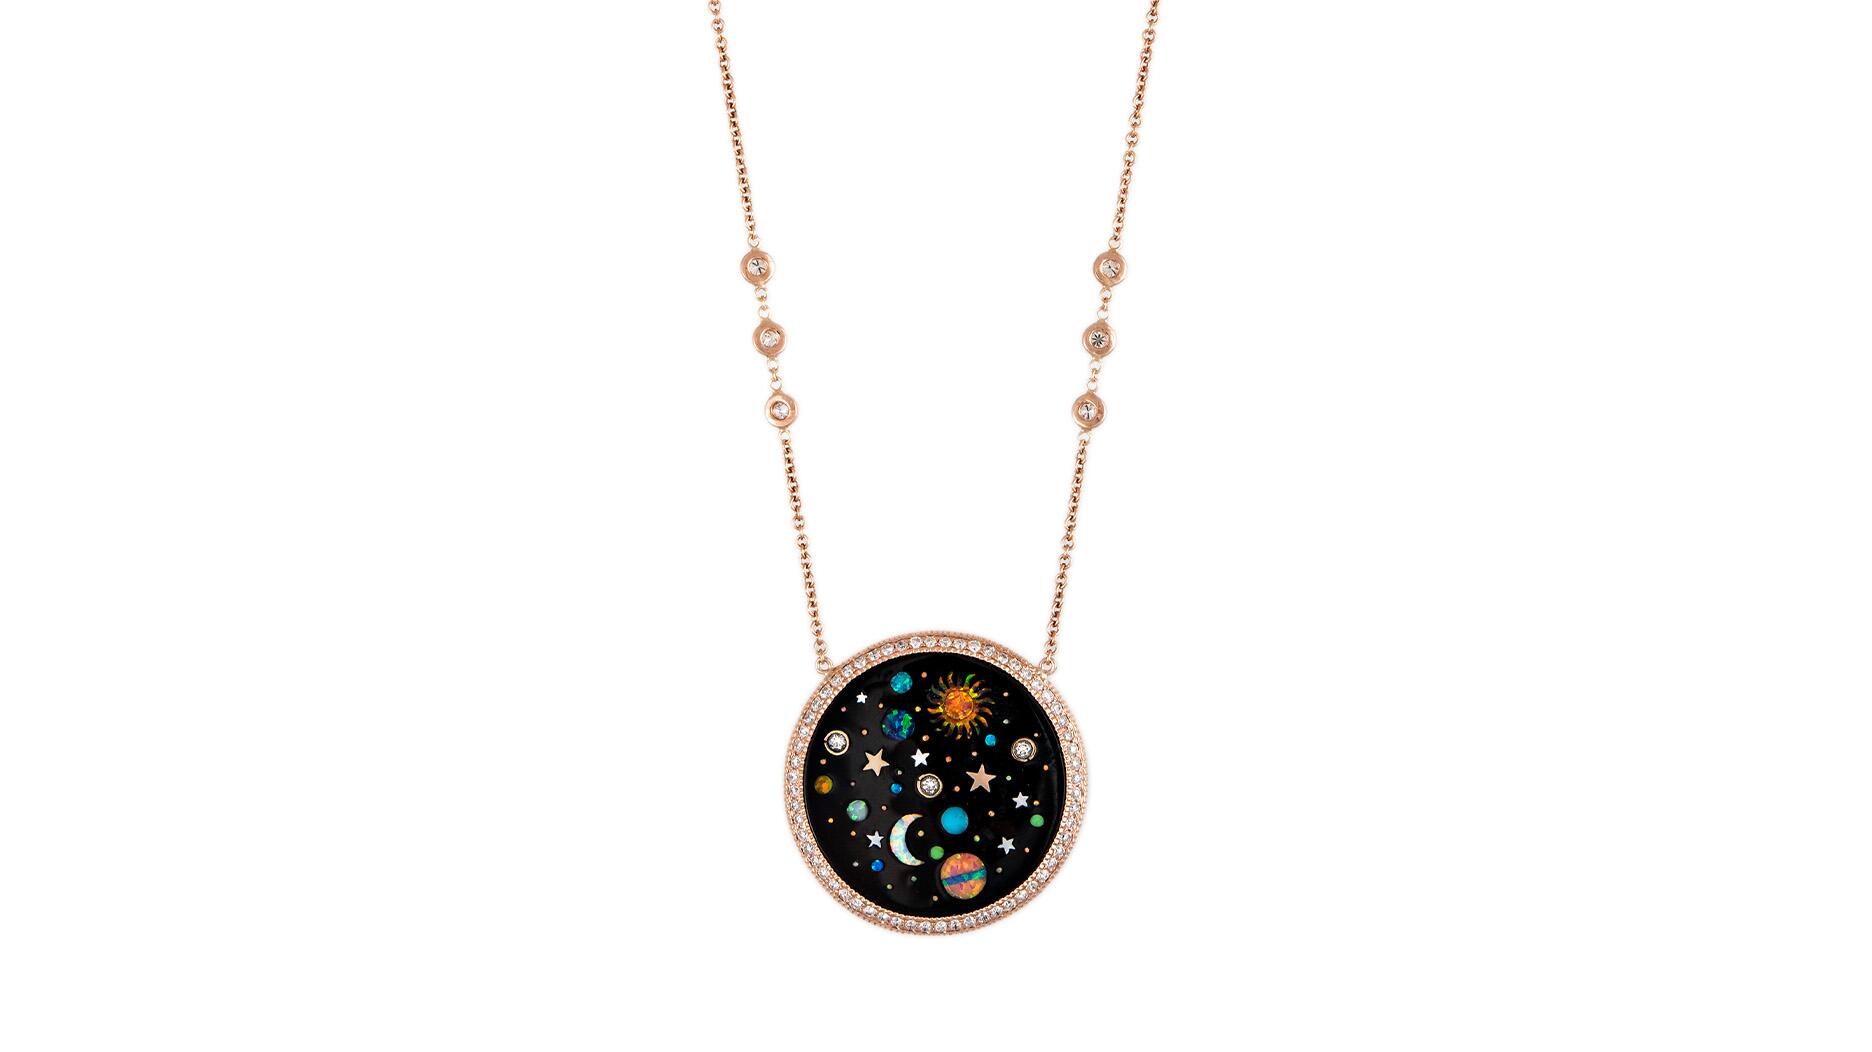 Jacquie Aiche’s Starry Galaxy Inlay Necklace